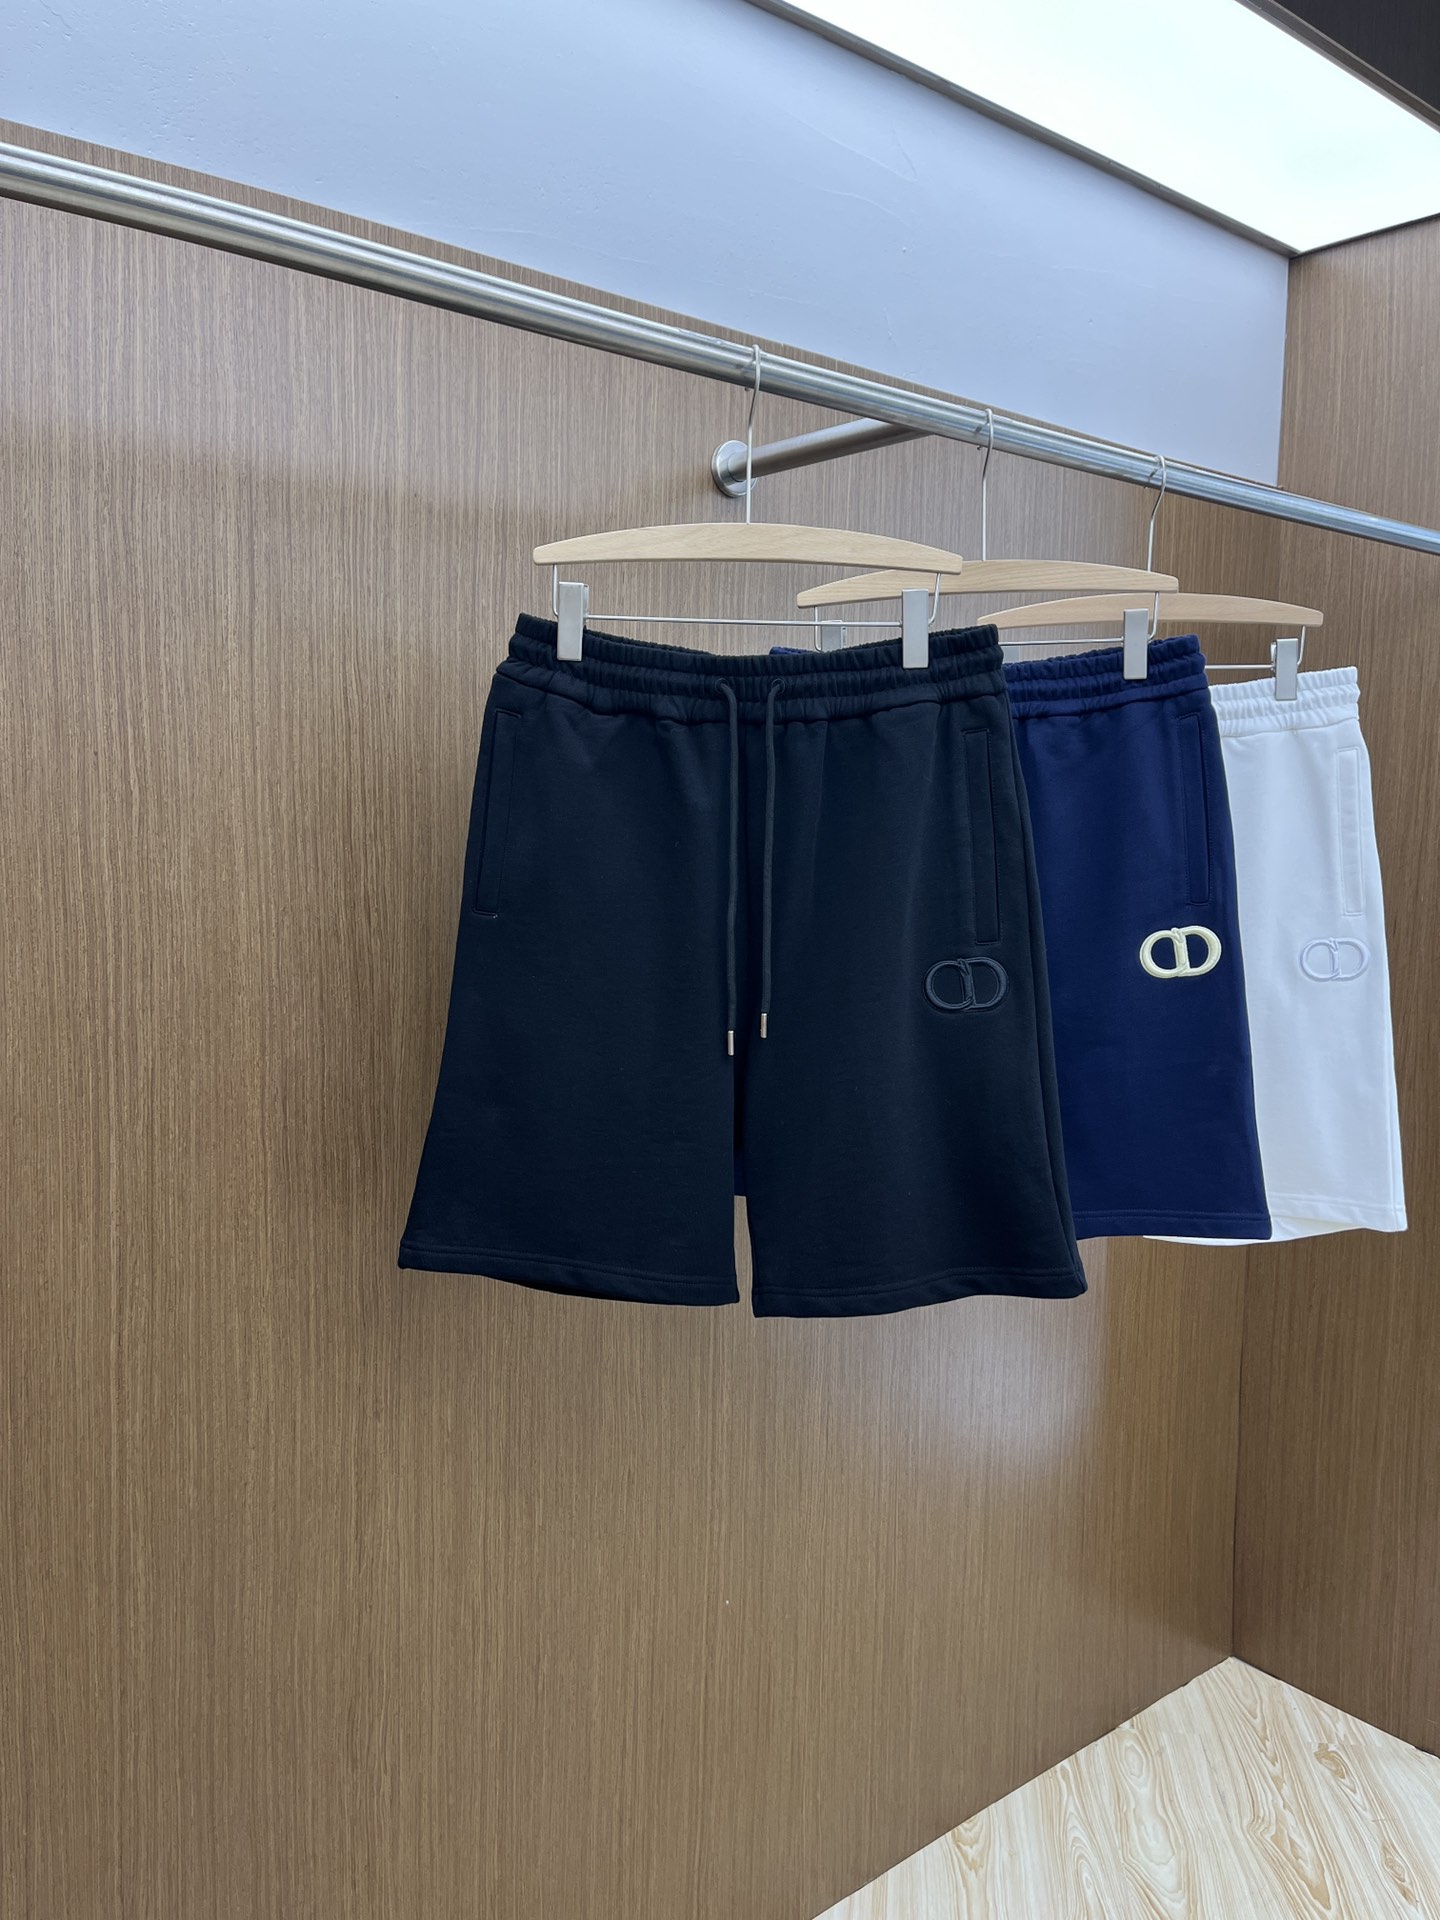 Dior Clothing Shorts Black Blue Green White Embroidery Cotton Spring/Summer Collection Casual